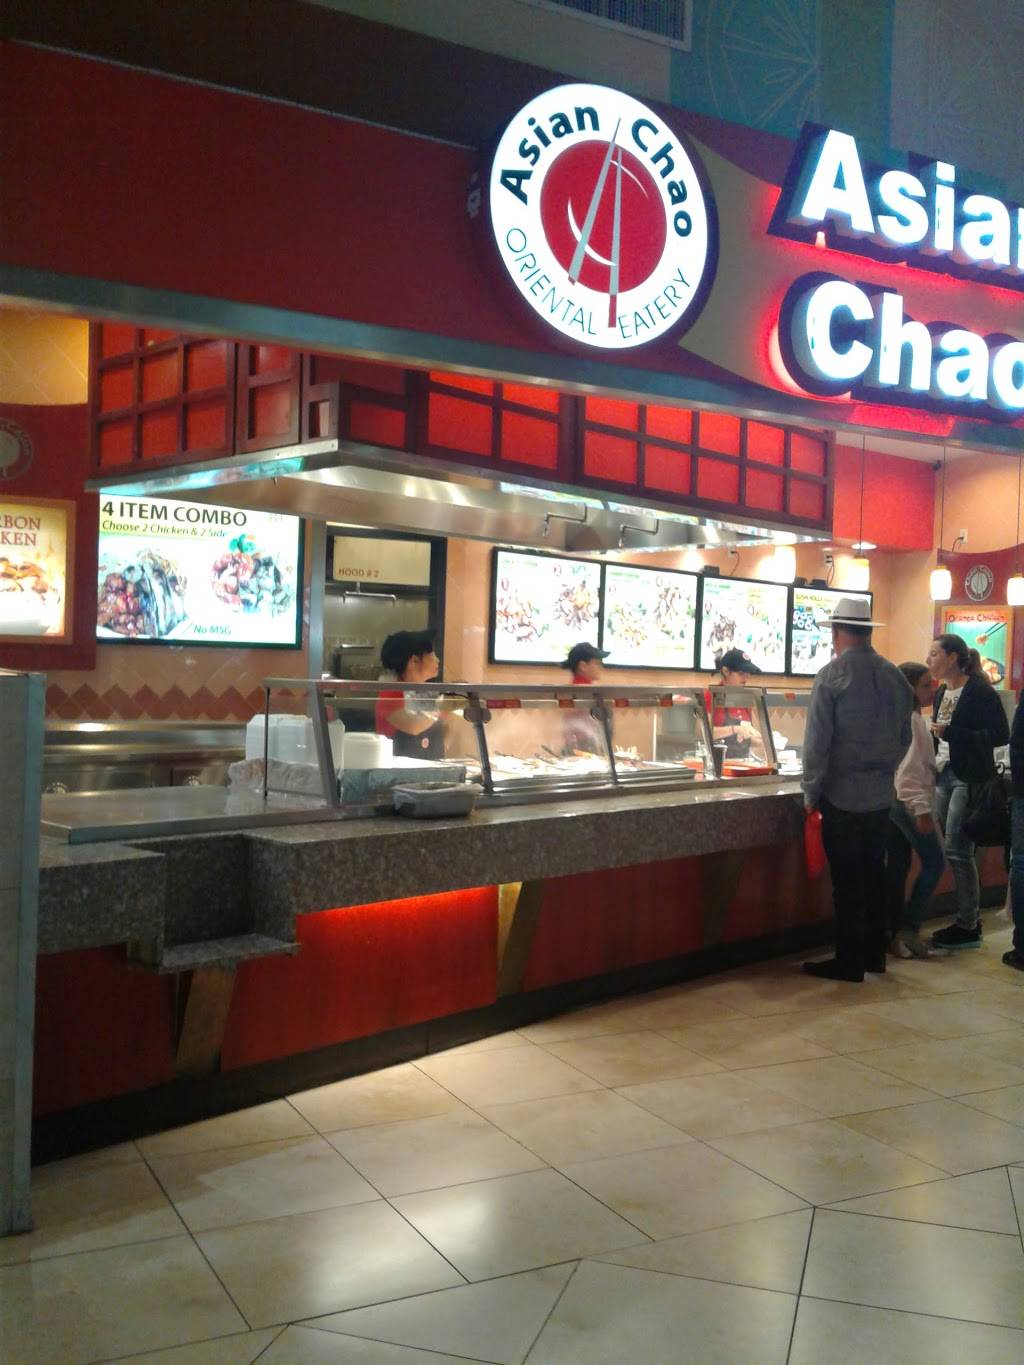 Asian Chao, Sawgrass Mills Mall, Sunrise, Florida - Picture of